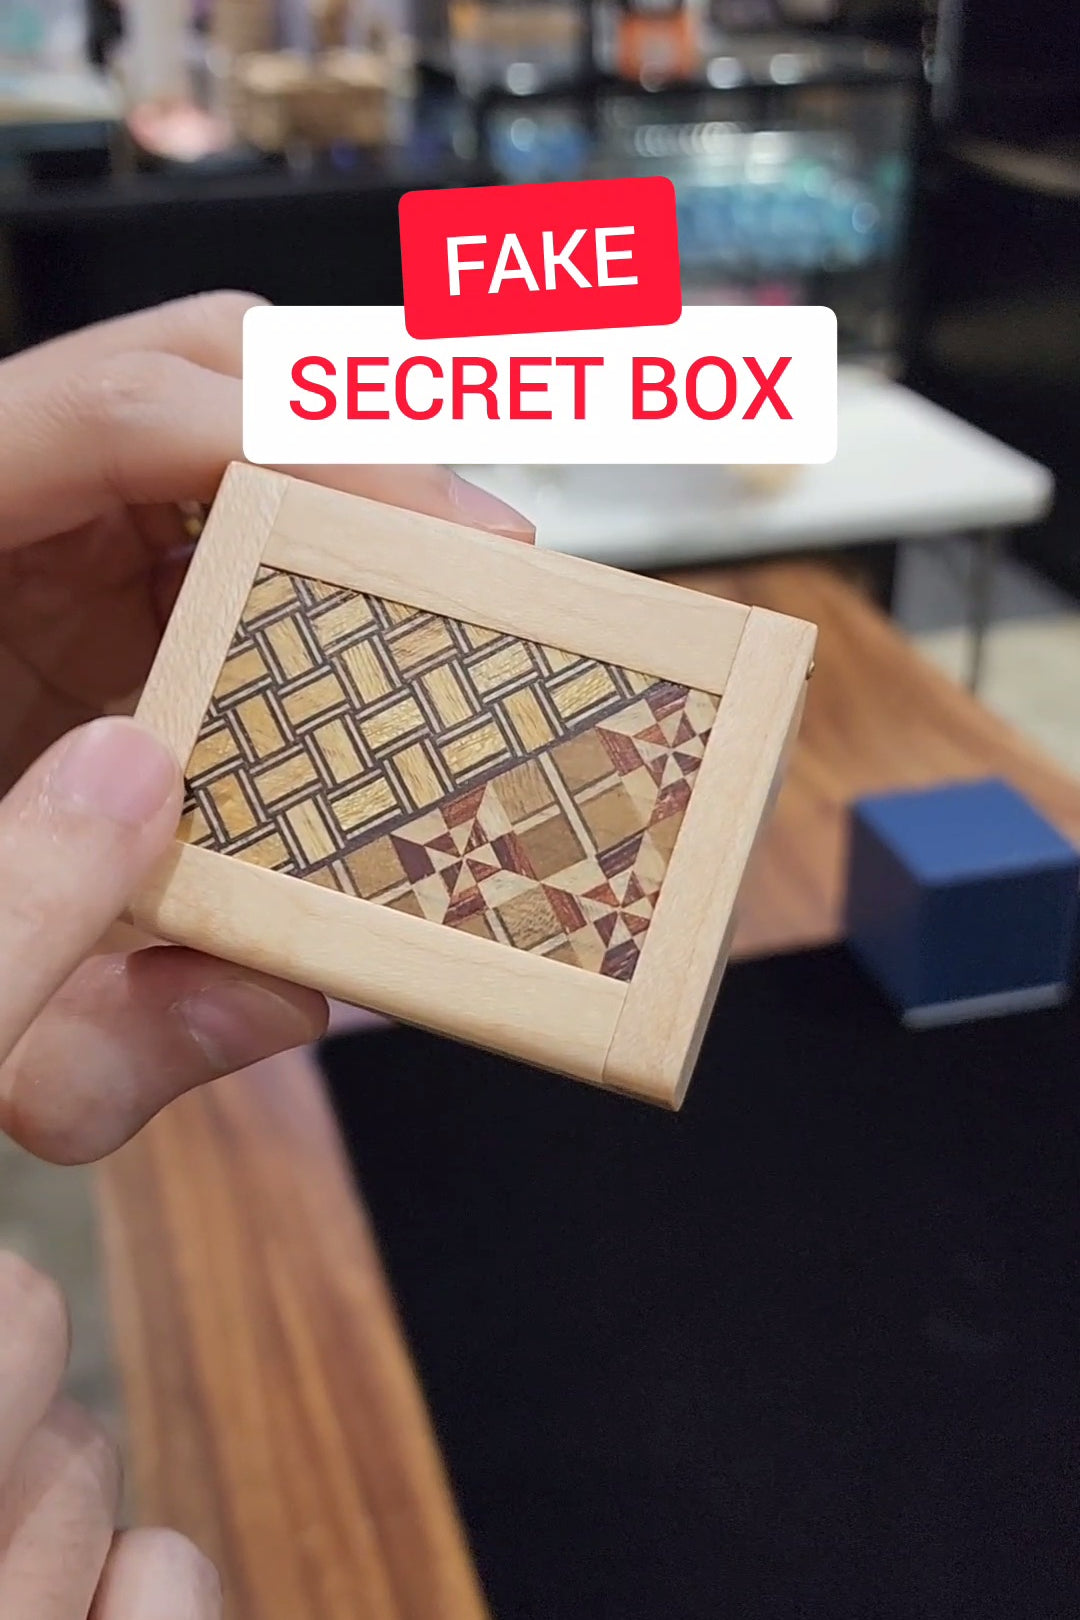 How to open the Fake Secret Box